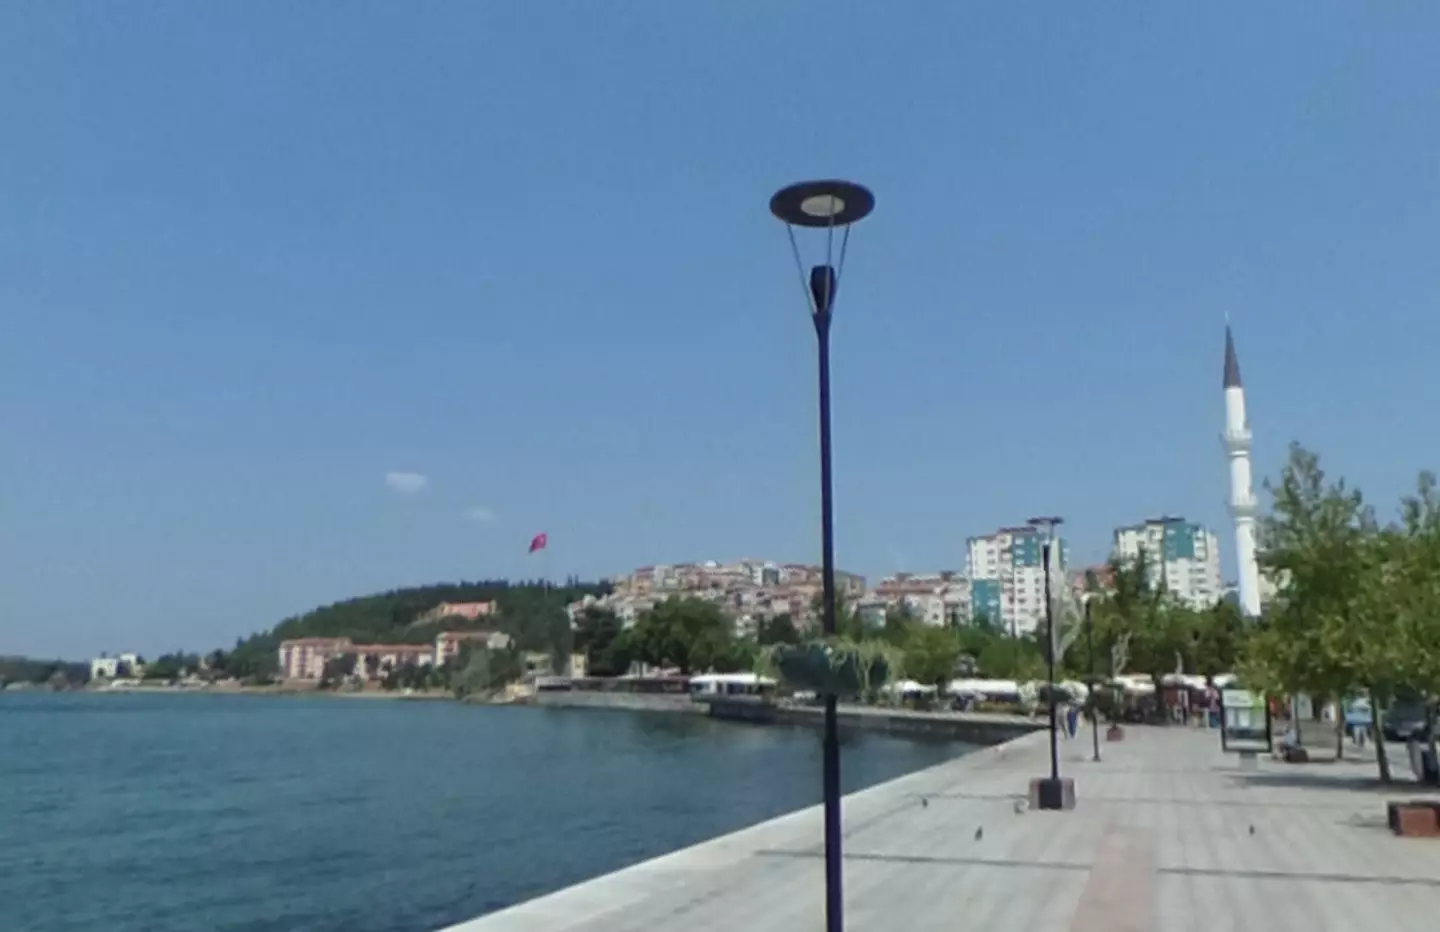 The pair were in Çanakkale, a city in north-west Turkey.